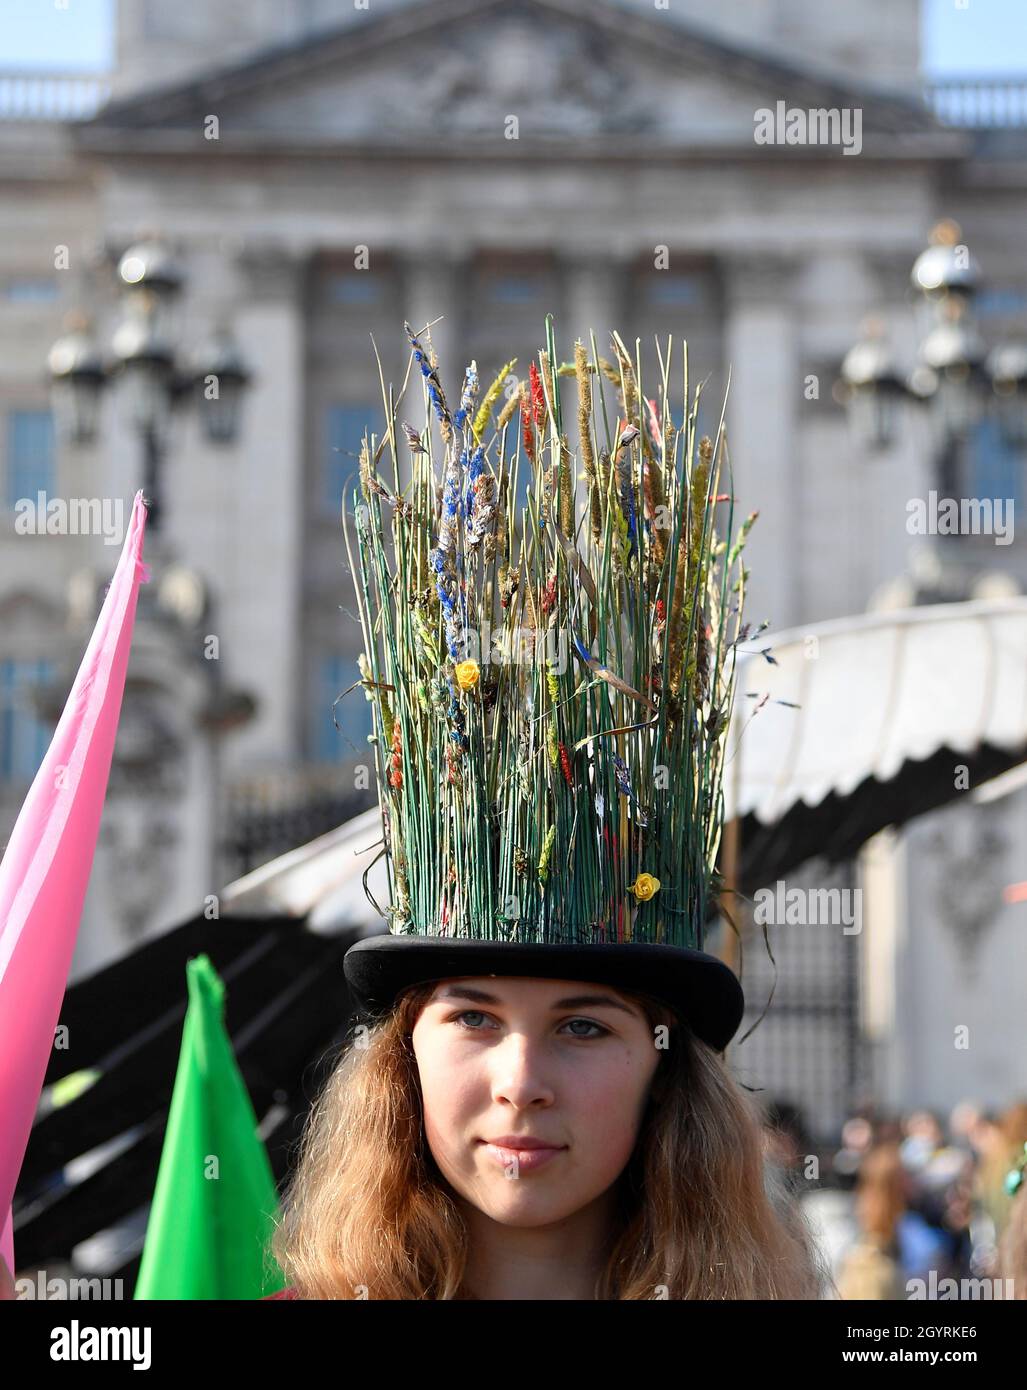 An environmental campaigner takes part in a march and delivery of a petition to Buckingham Palace, demanding that the British royal family rewild their land, ahead of the COP26 climate summit due to take place in November, in London, Britain, October 9, 2021. REUTERS/Toby Melville Stock Photo